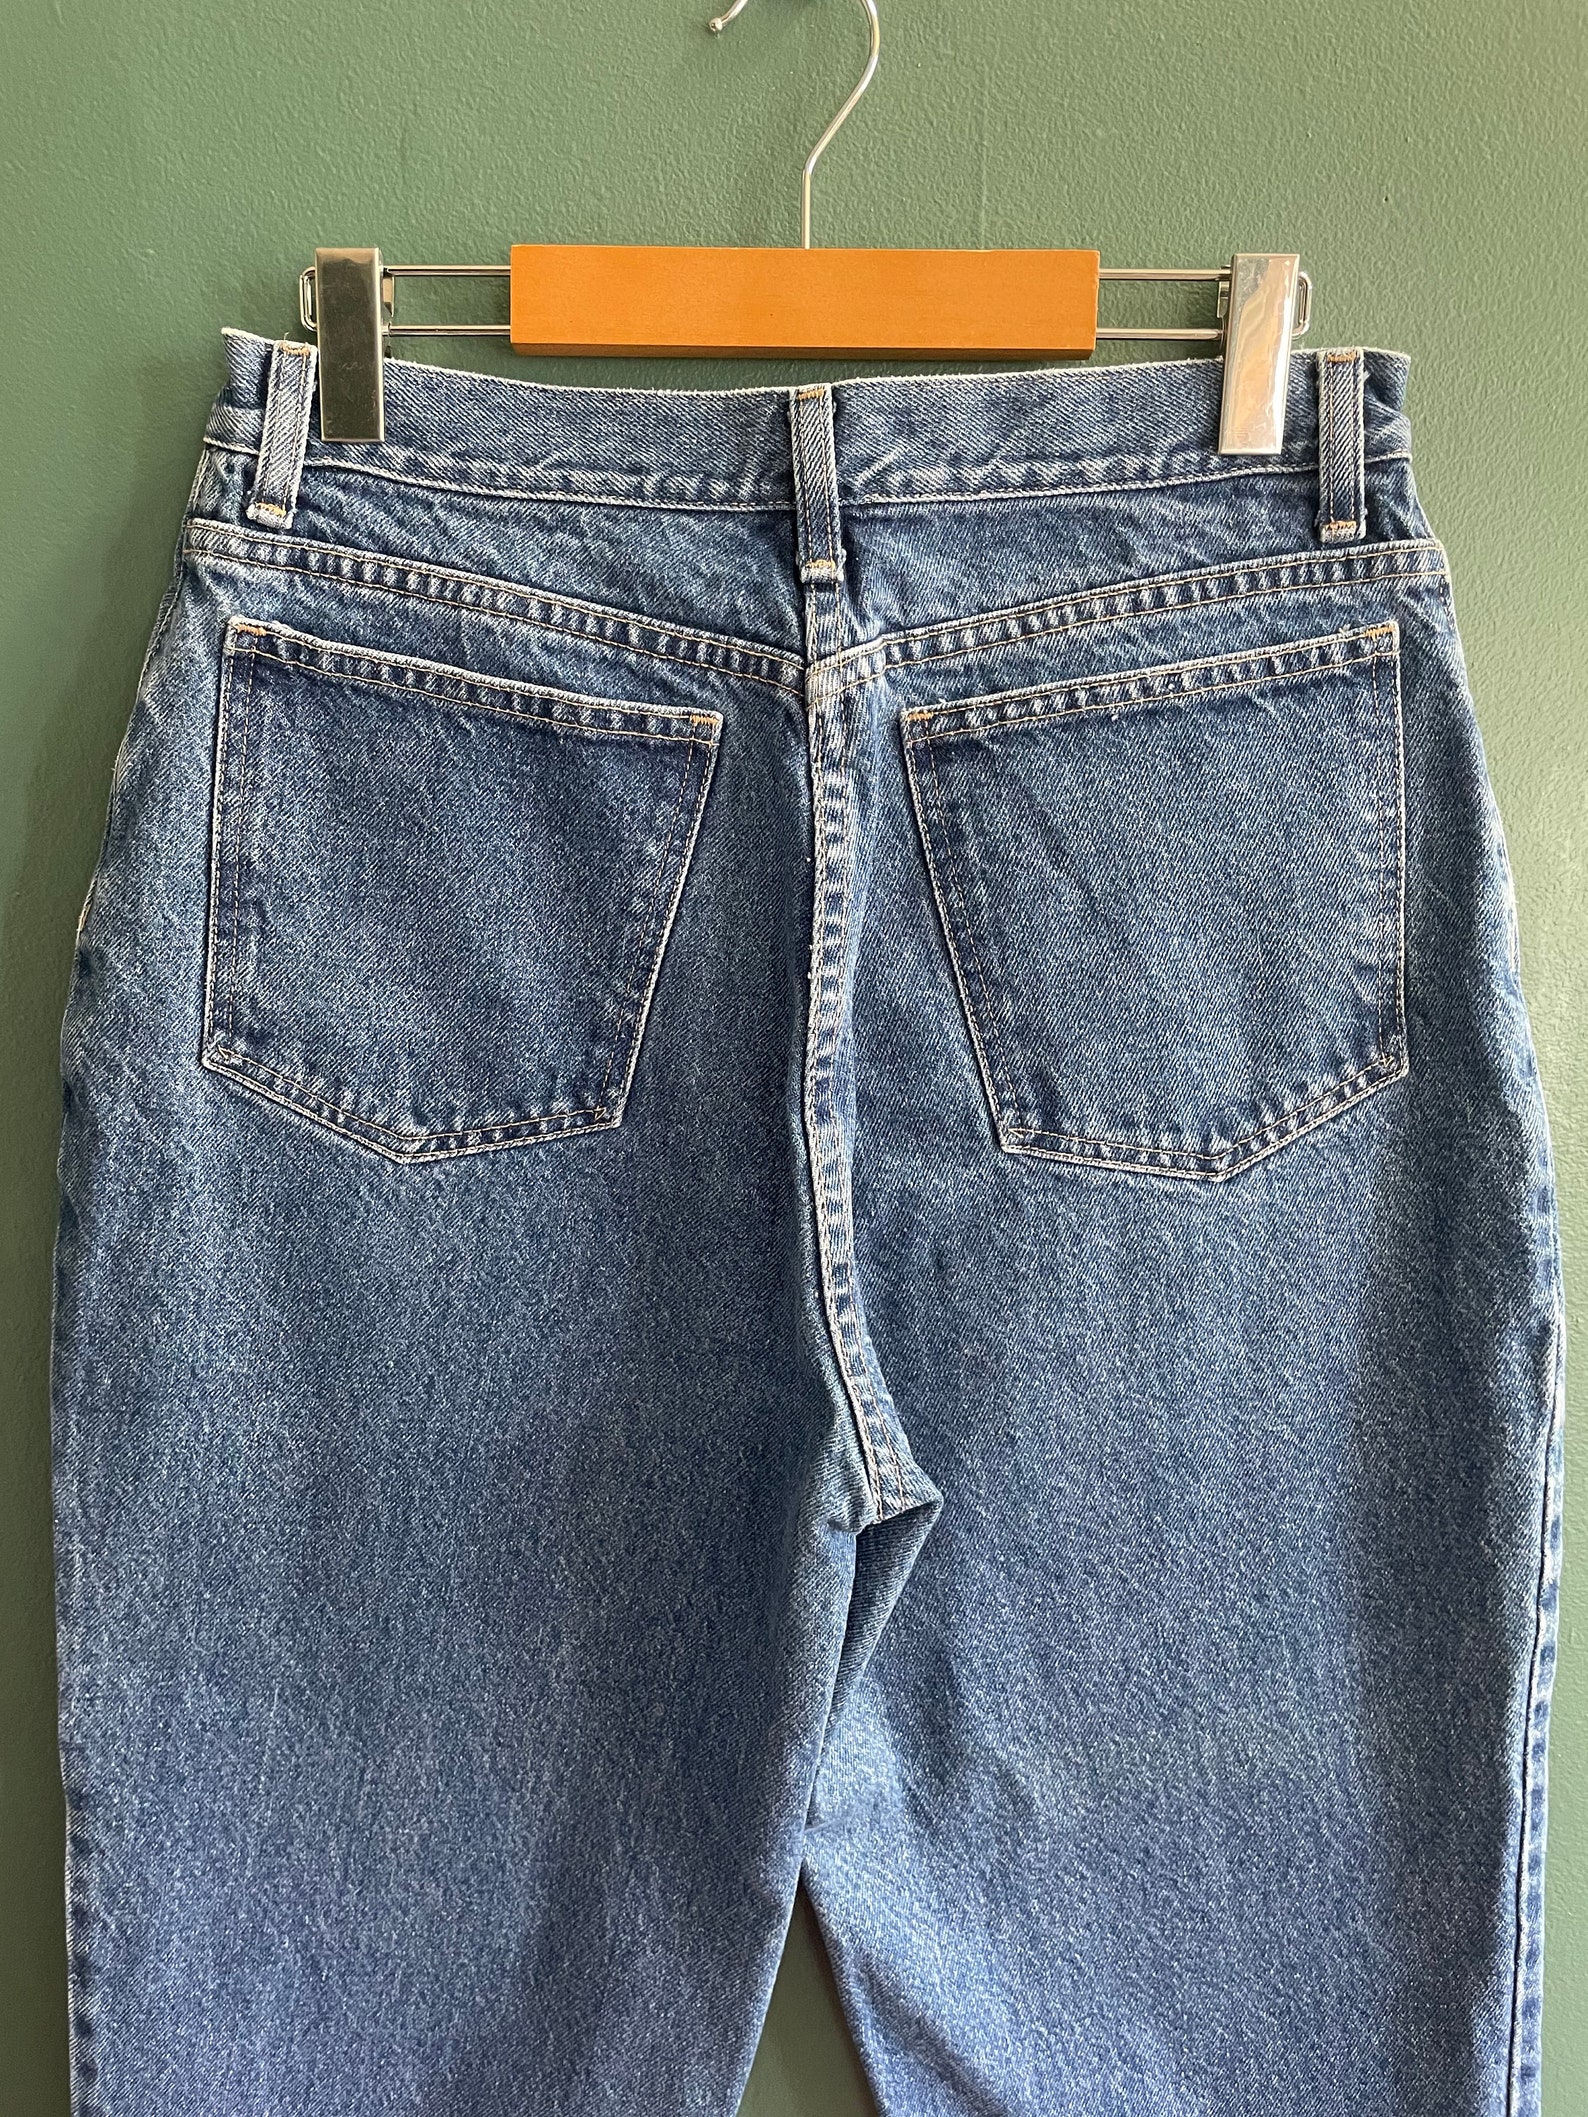 90s Vintage Jeans / 1990s High Waisted Jeans / Size Medium / | Etsy